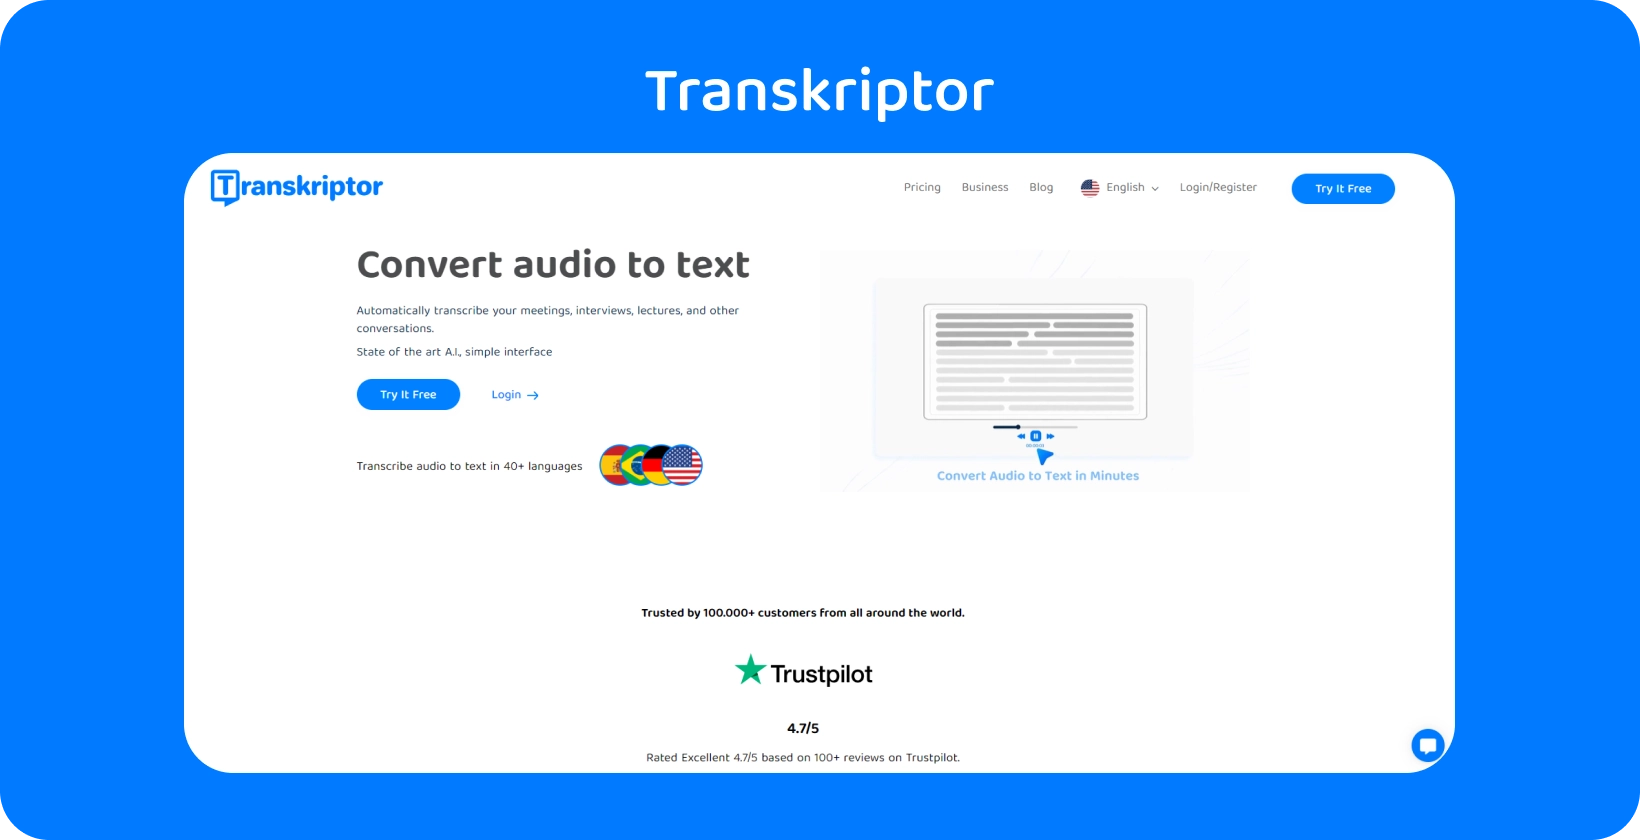 Transkriptor's interface showcasing the meeting assistant feature, streamlining qualitative research transcription.